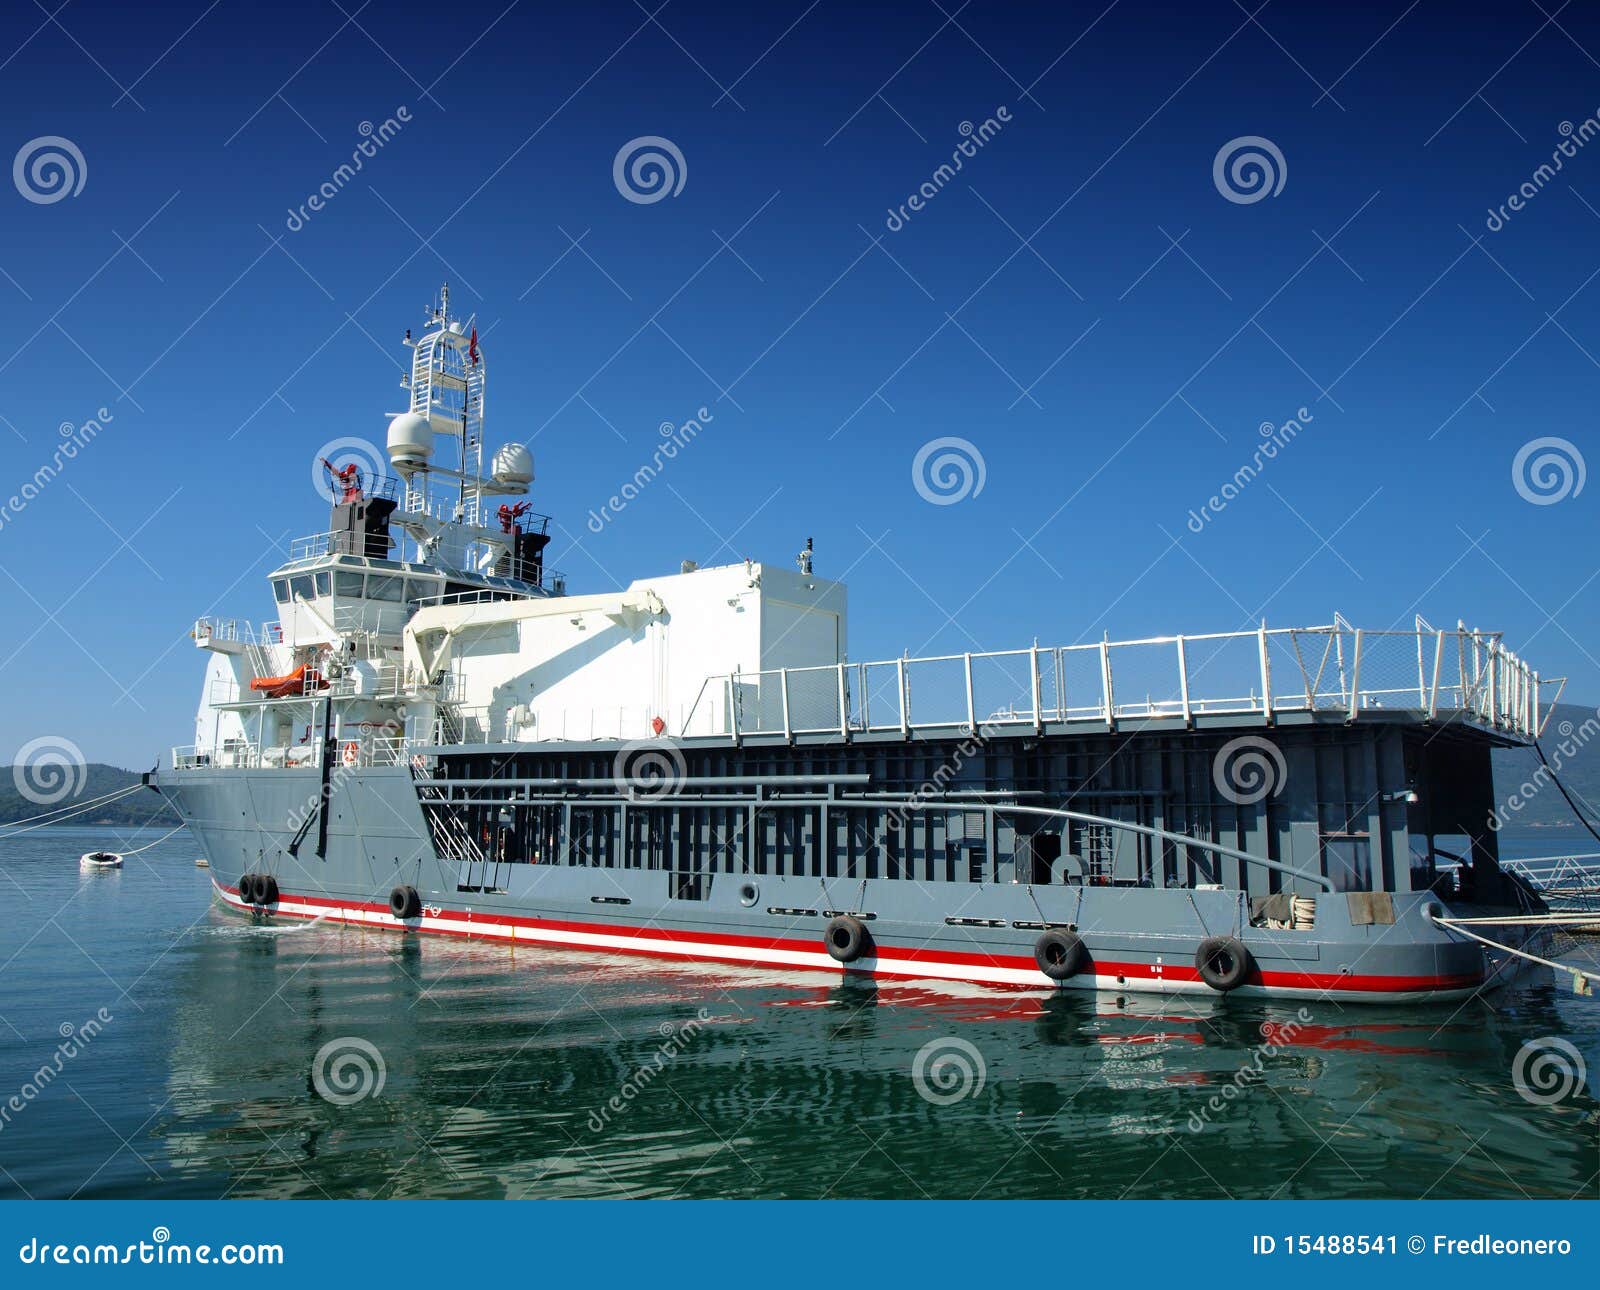 Image result for fire ship